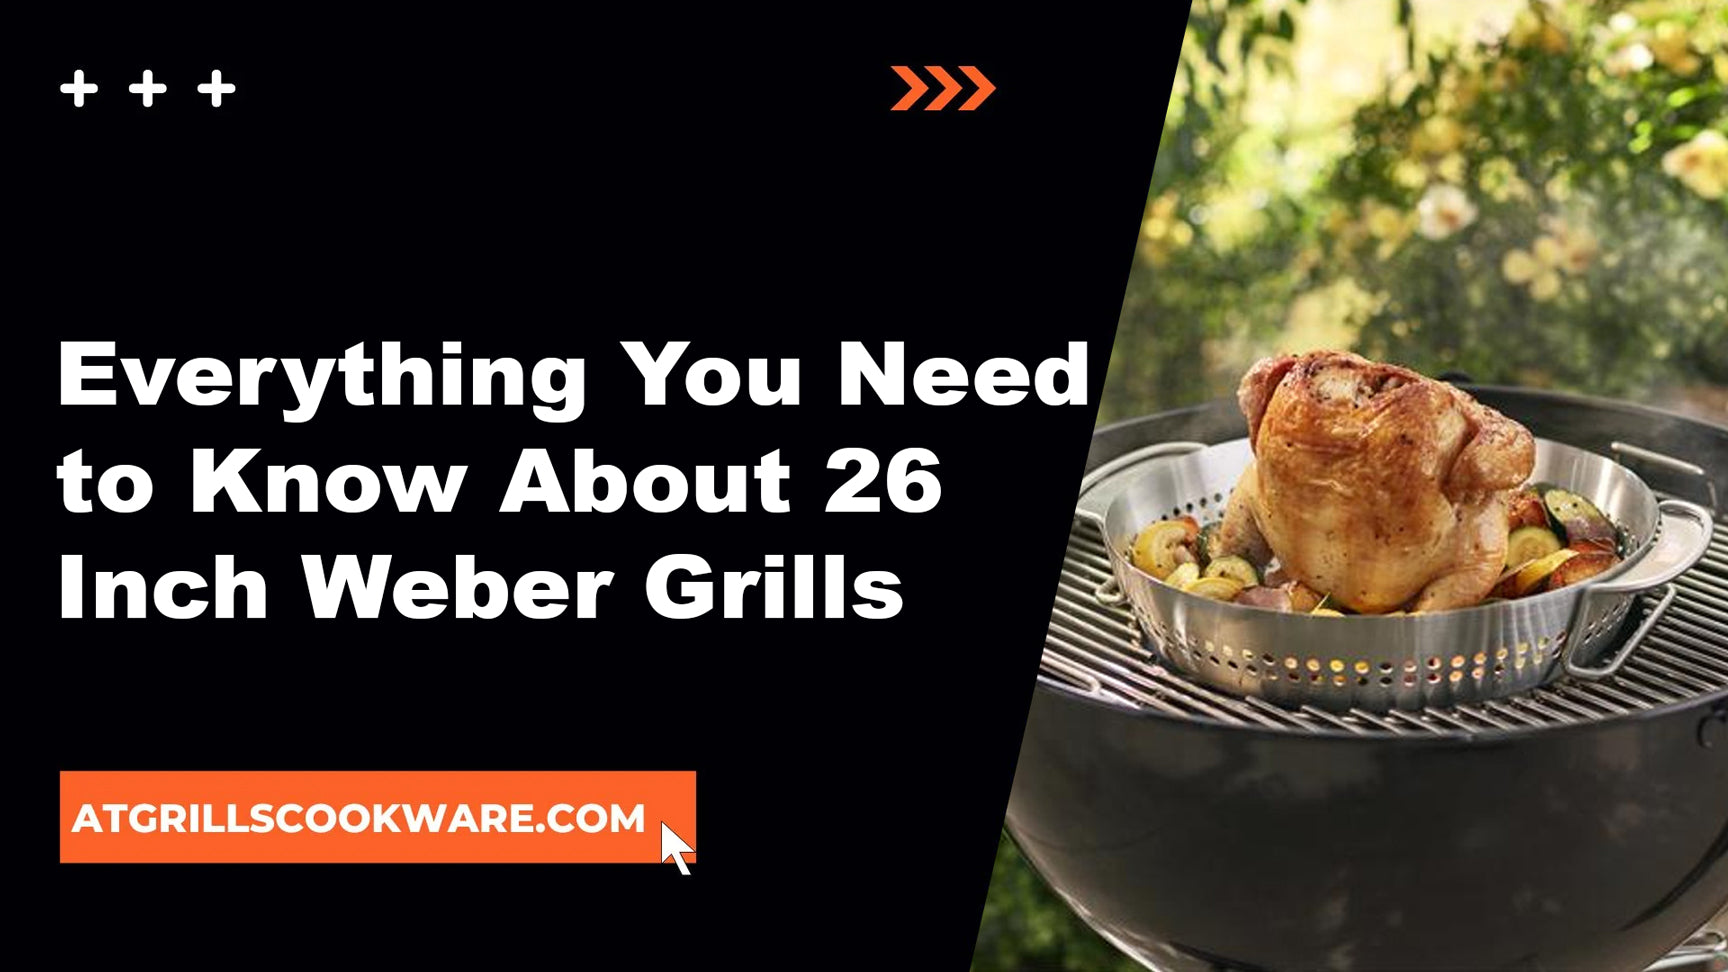 Grill Like A Gourmet: Your Comprehensive Guide to 26 Inch Weber Grills